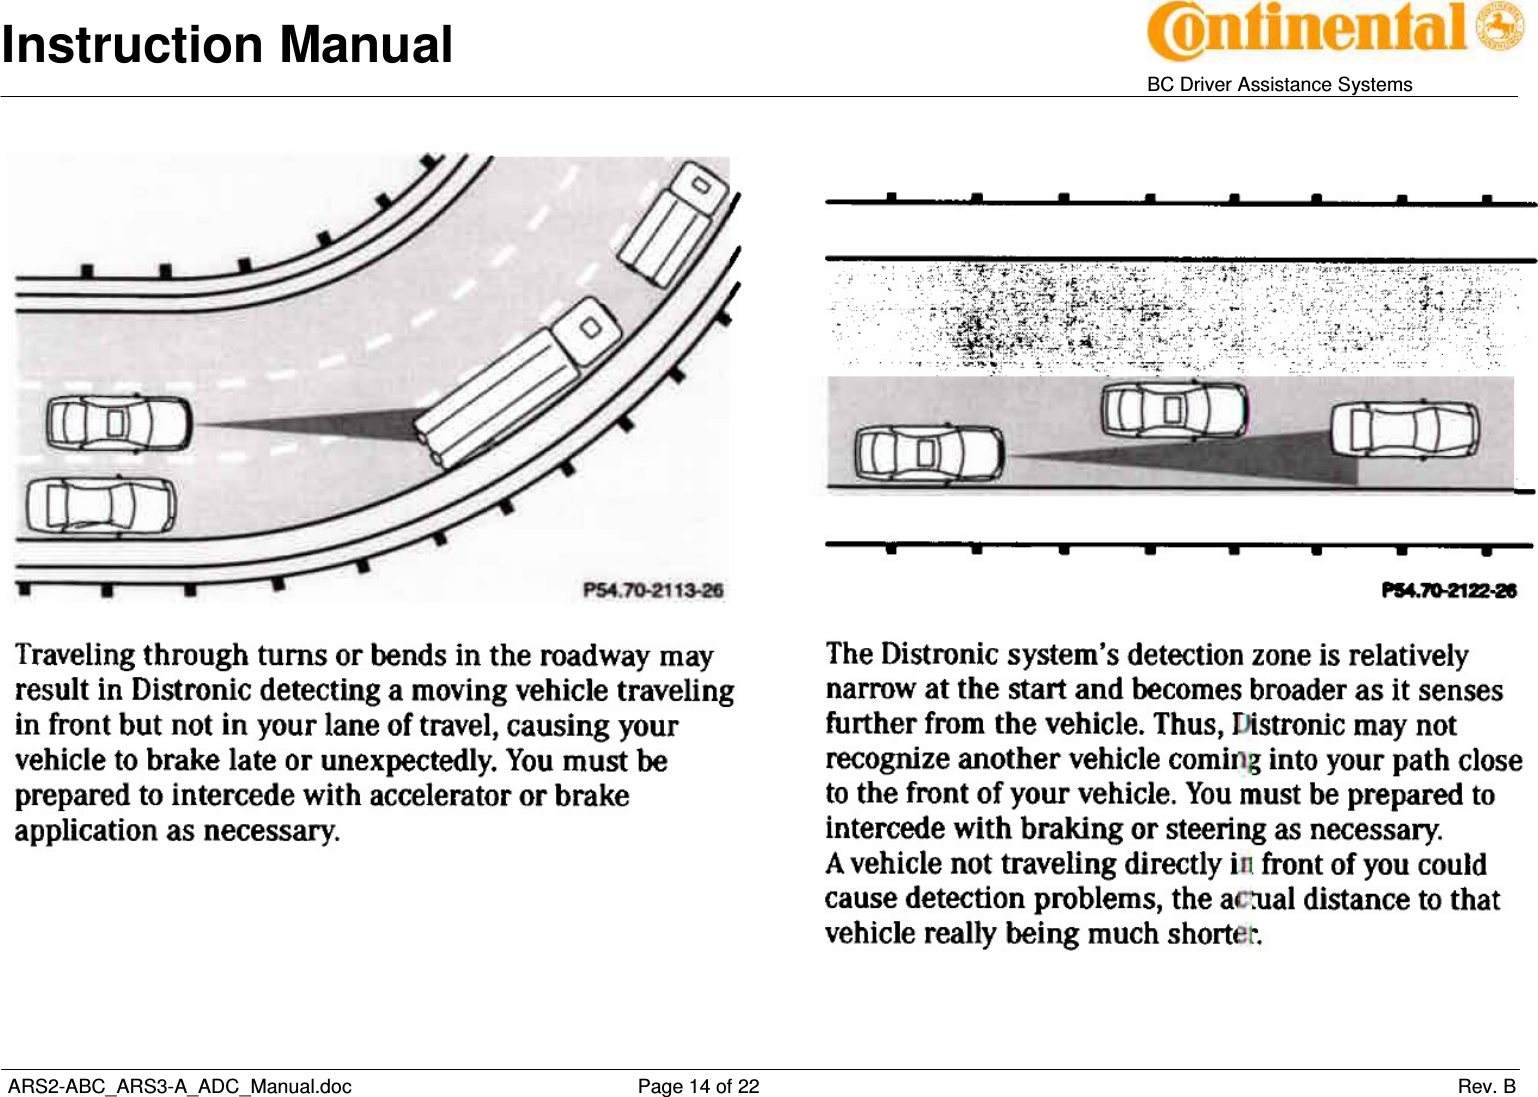 Instruction Manual   BC Driver Assistance Systems  ARS2-ABC_ARS3-A_ADC_Manual.doc     Page 14 of 22                 Rev. B   